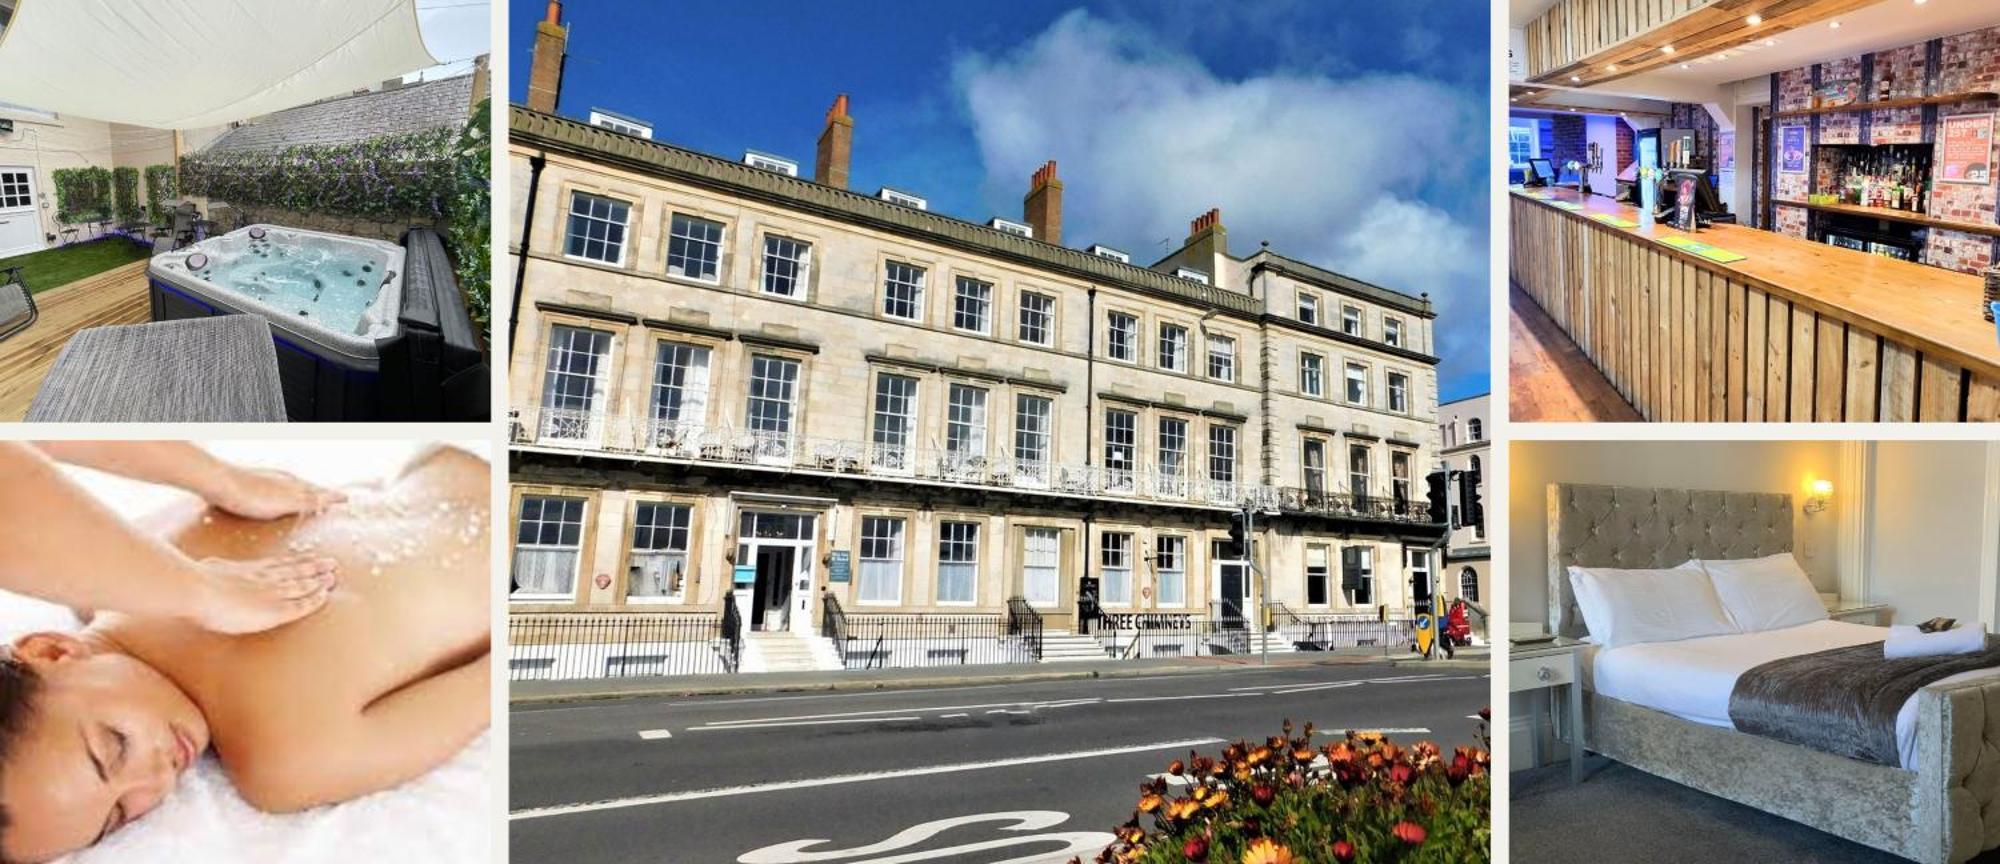 The Jubilee Hotel - With Spa And Restaurant And Entertainment Weymouth Exterior foto